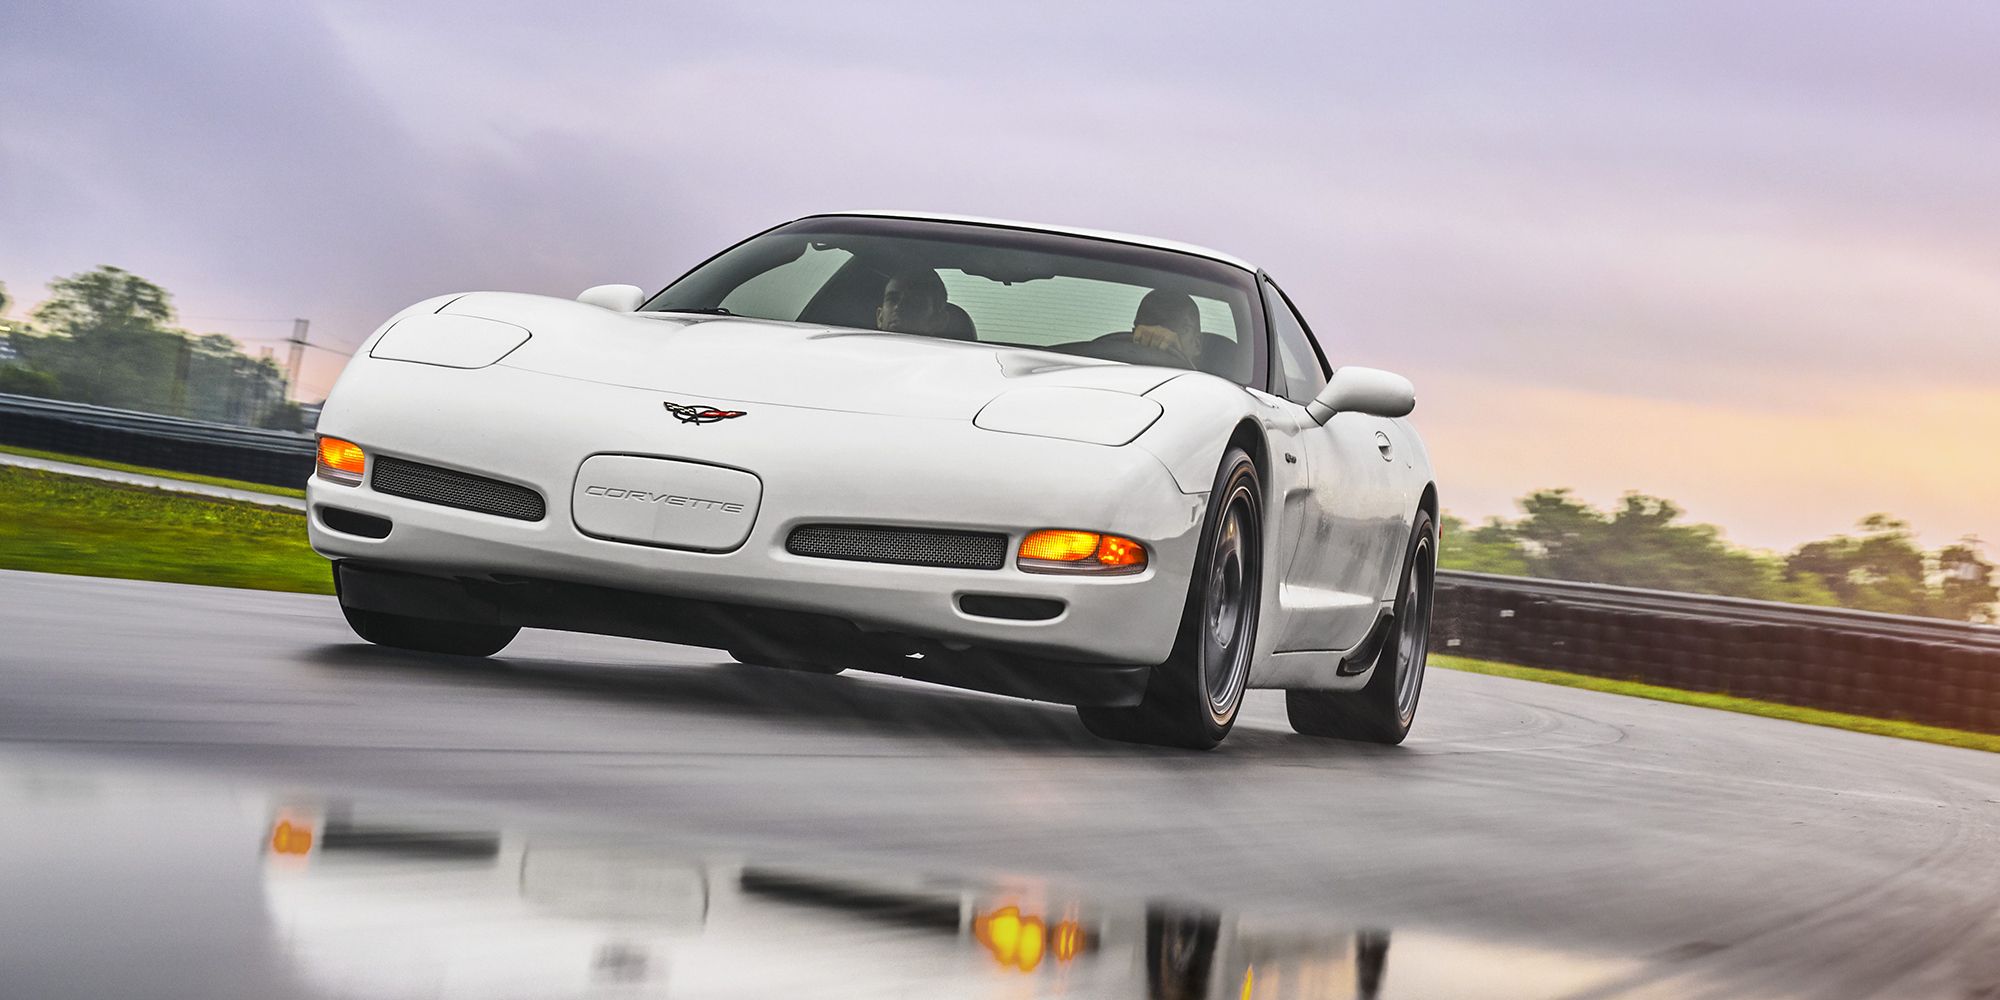 The C5 Corvette May Be the Ultimate Performance Bargain